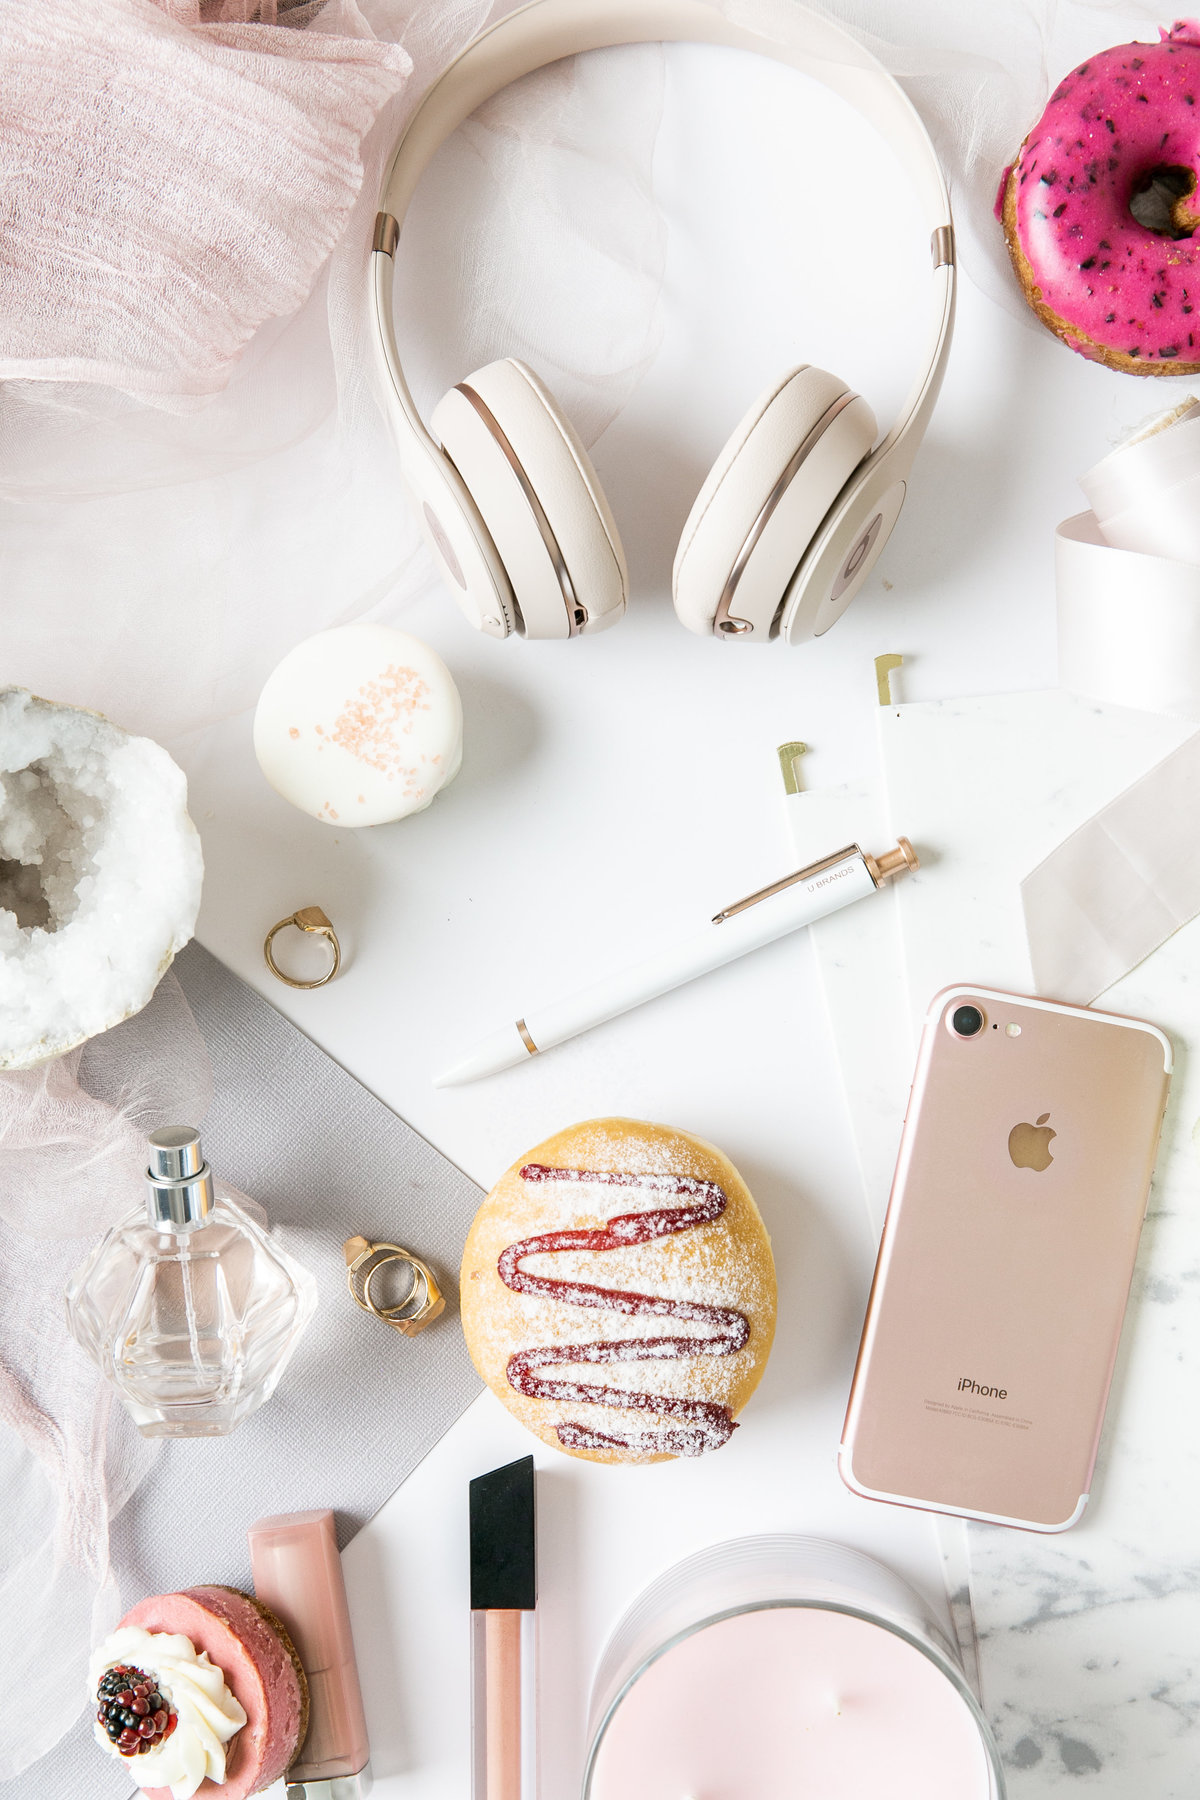 Karlie Colleen Photography - All Things OutSourcing- Flatlay photos-198